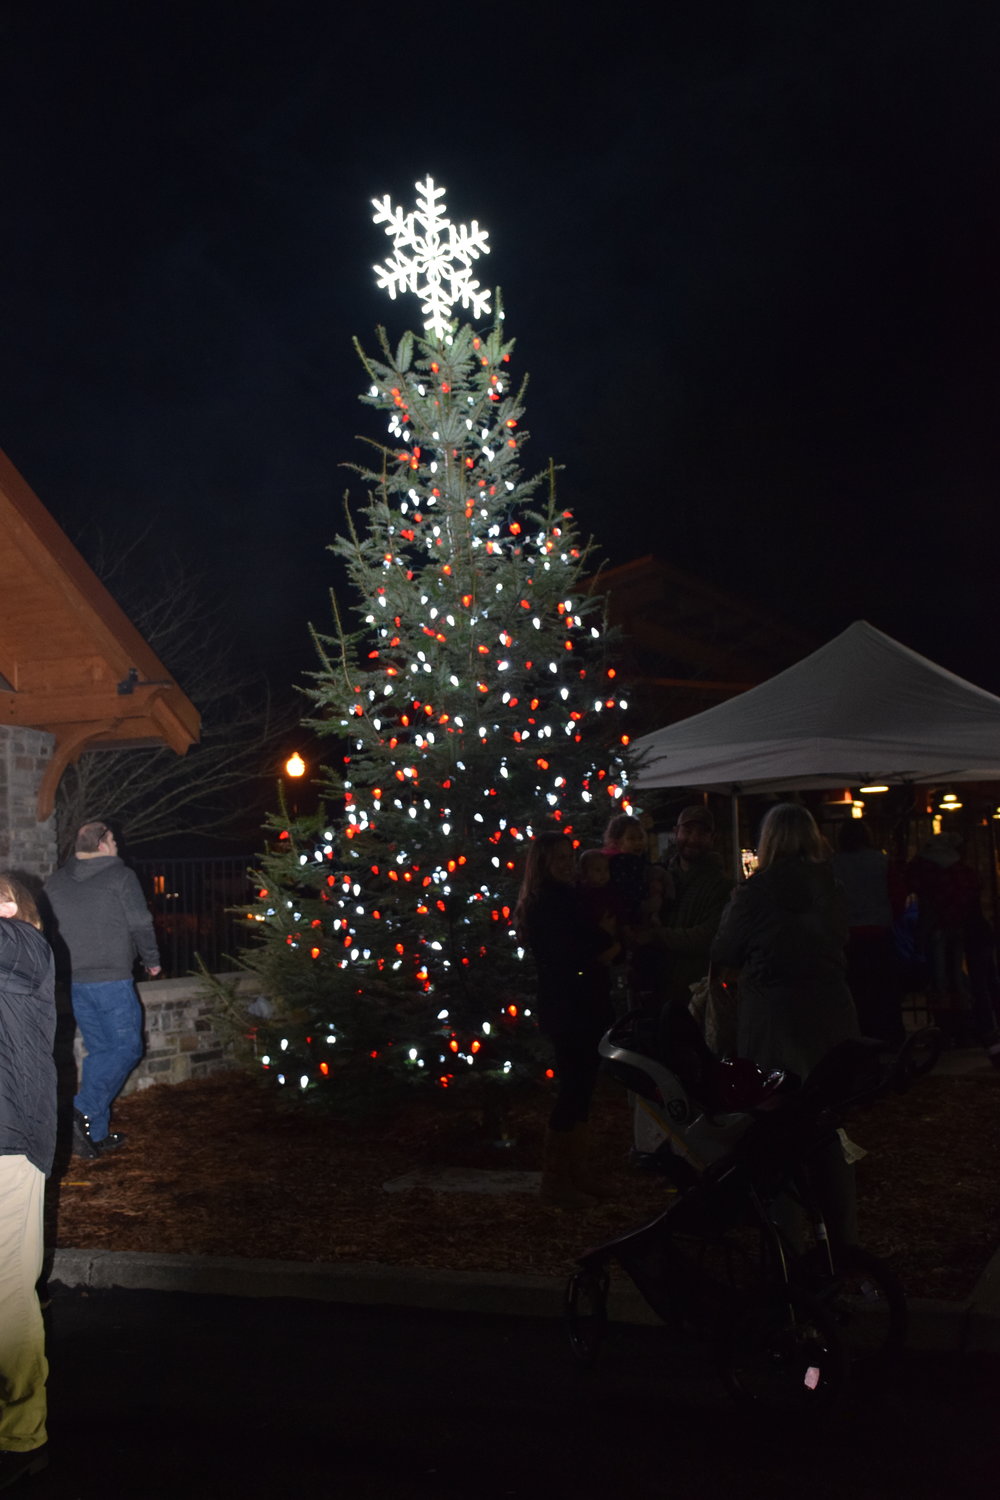 The Battle Ground Christmas tree lights up during a holiday ceremony in 2021.